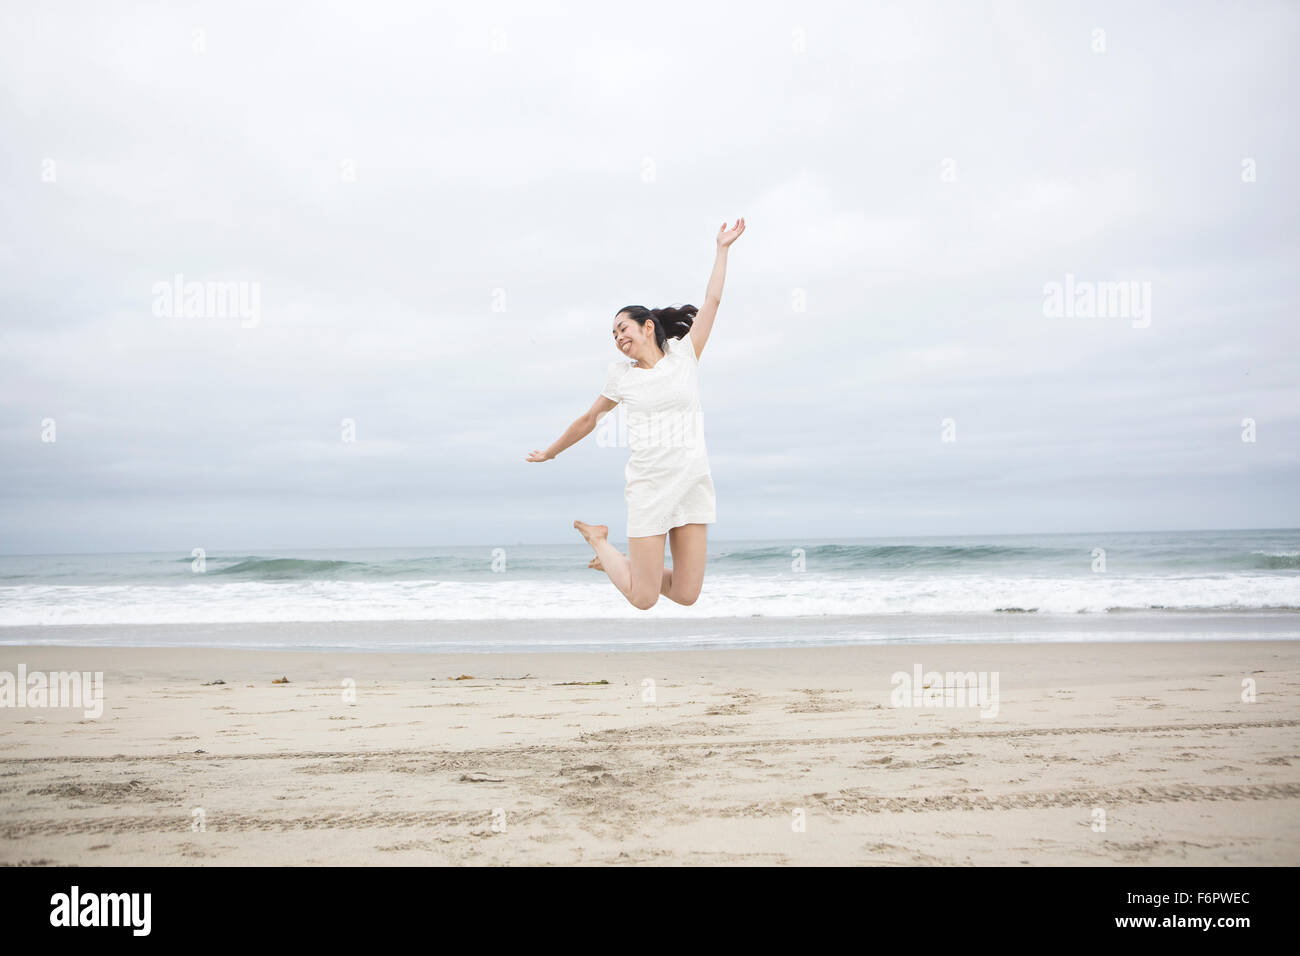 Woman jumping for joy on beach Stock Photo